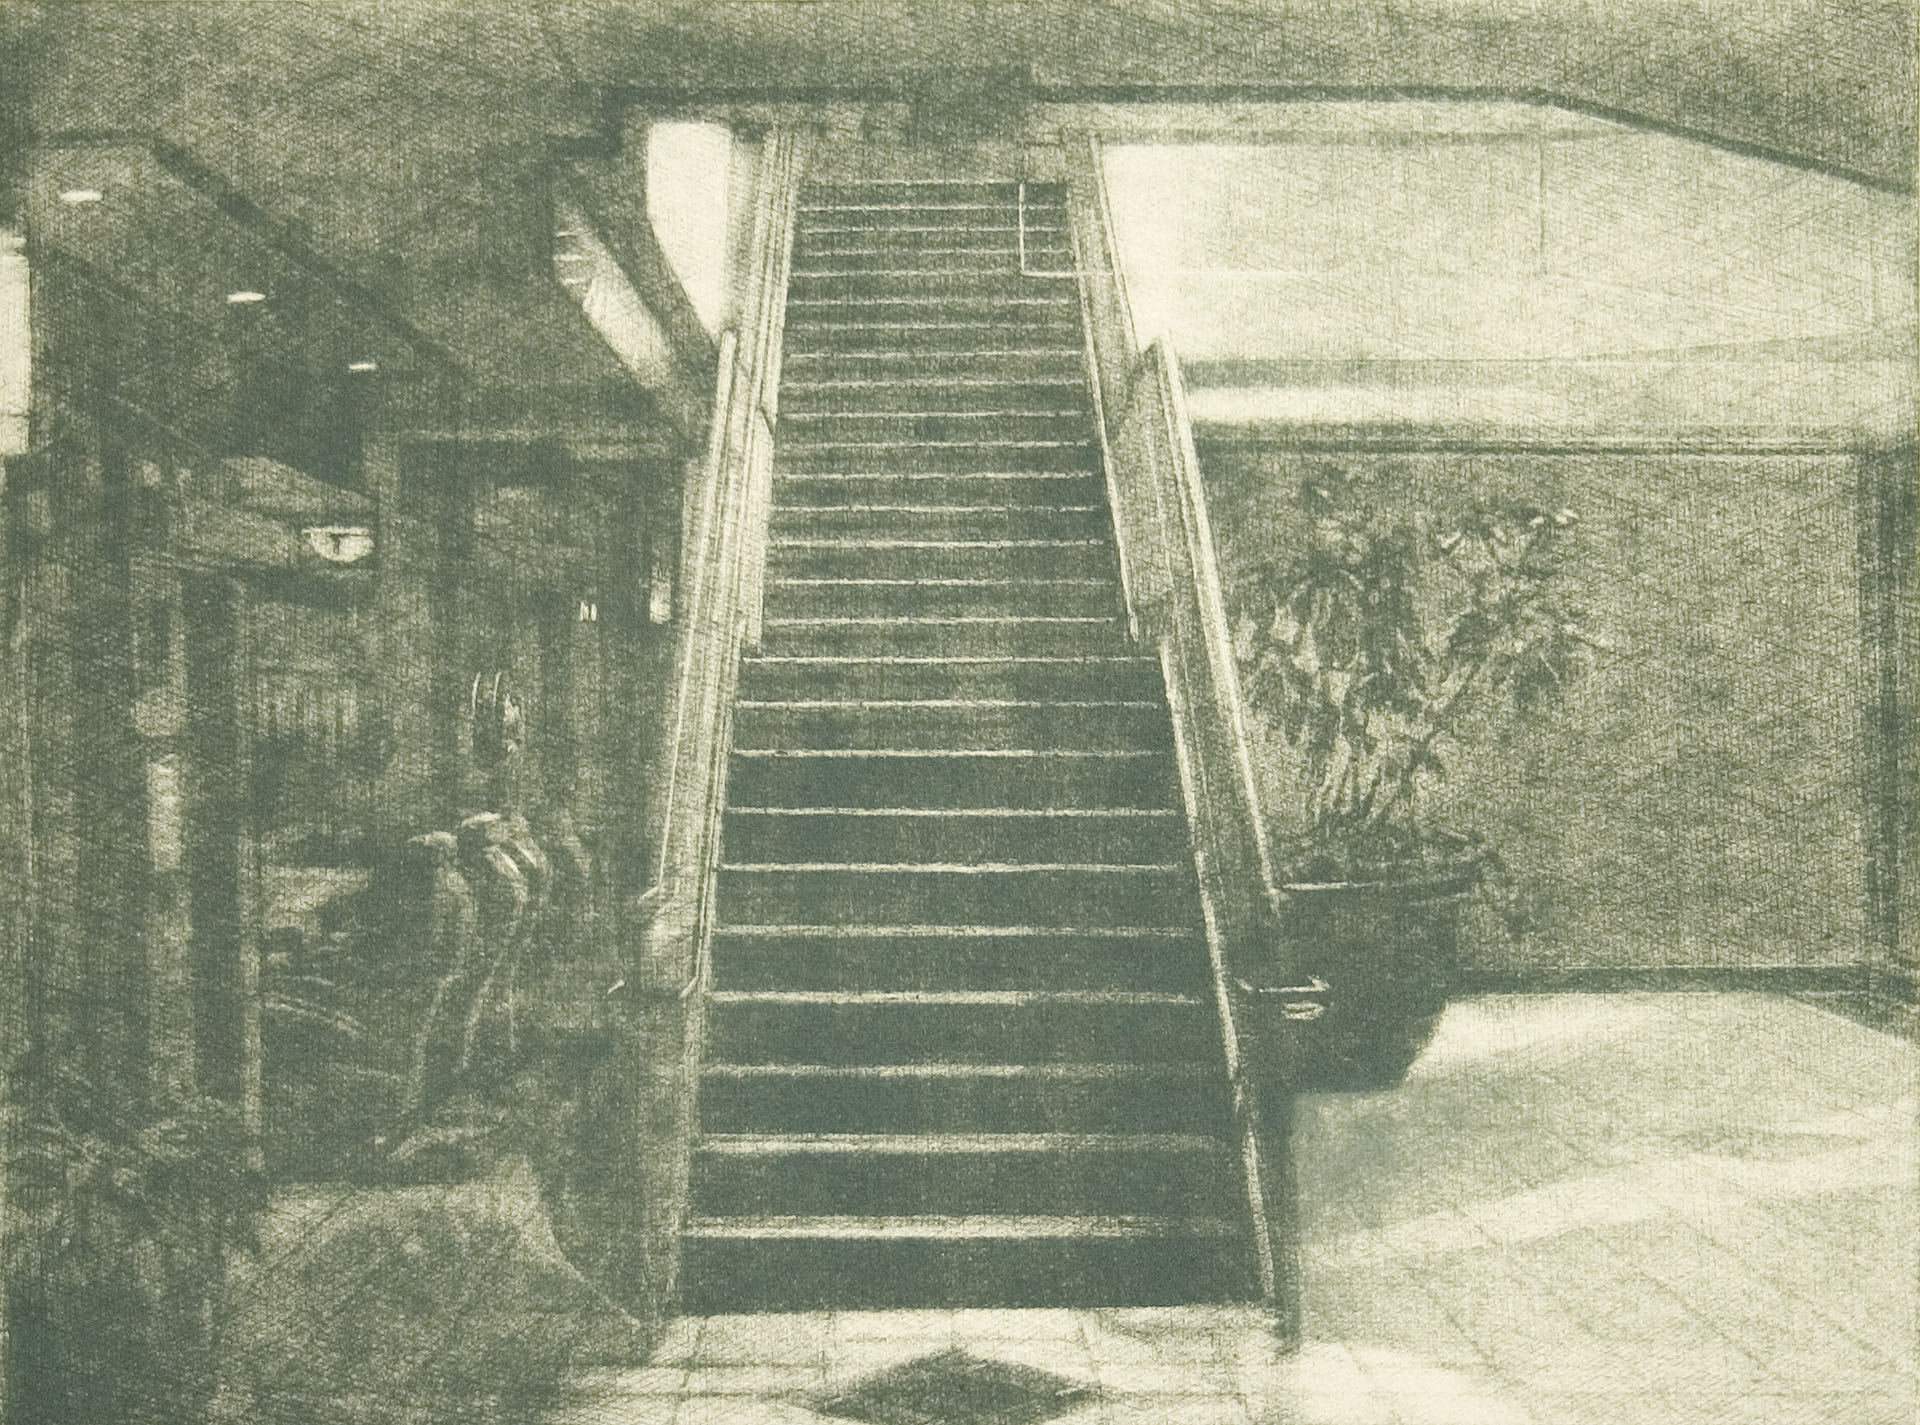  Stairs, 2009, burnished drypoint & graphite, 140 x 190mm, private collection 